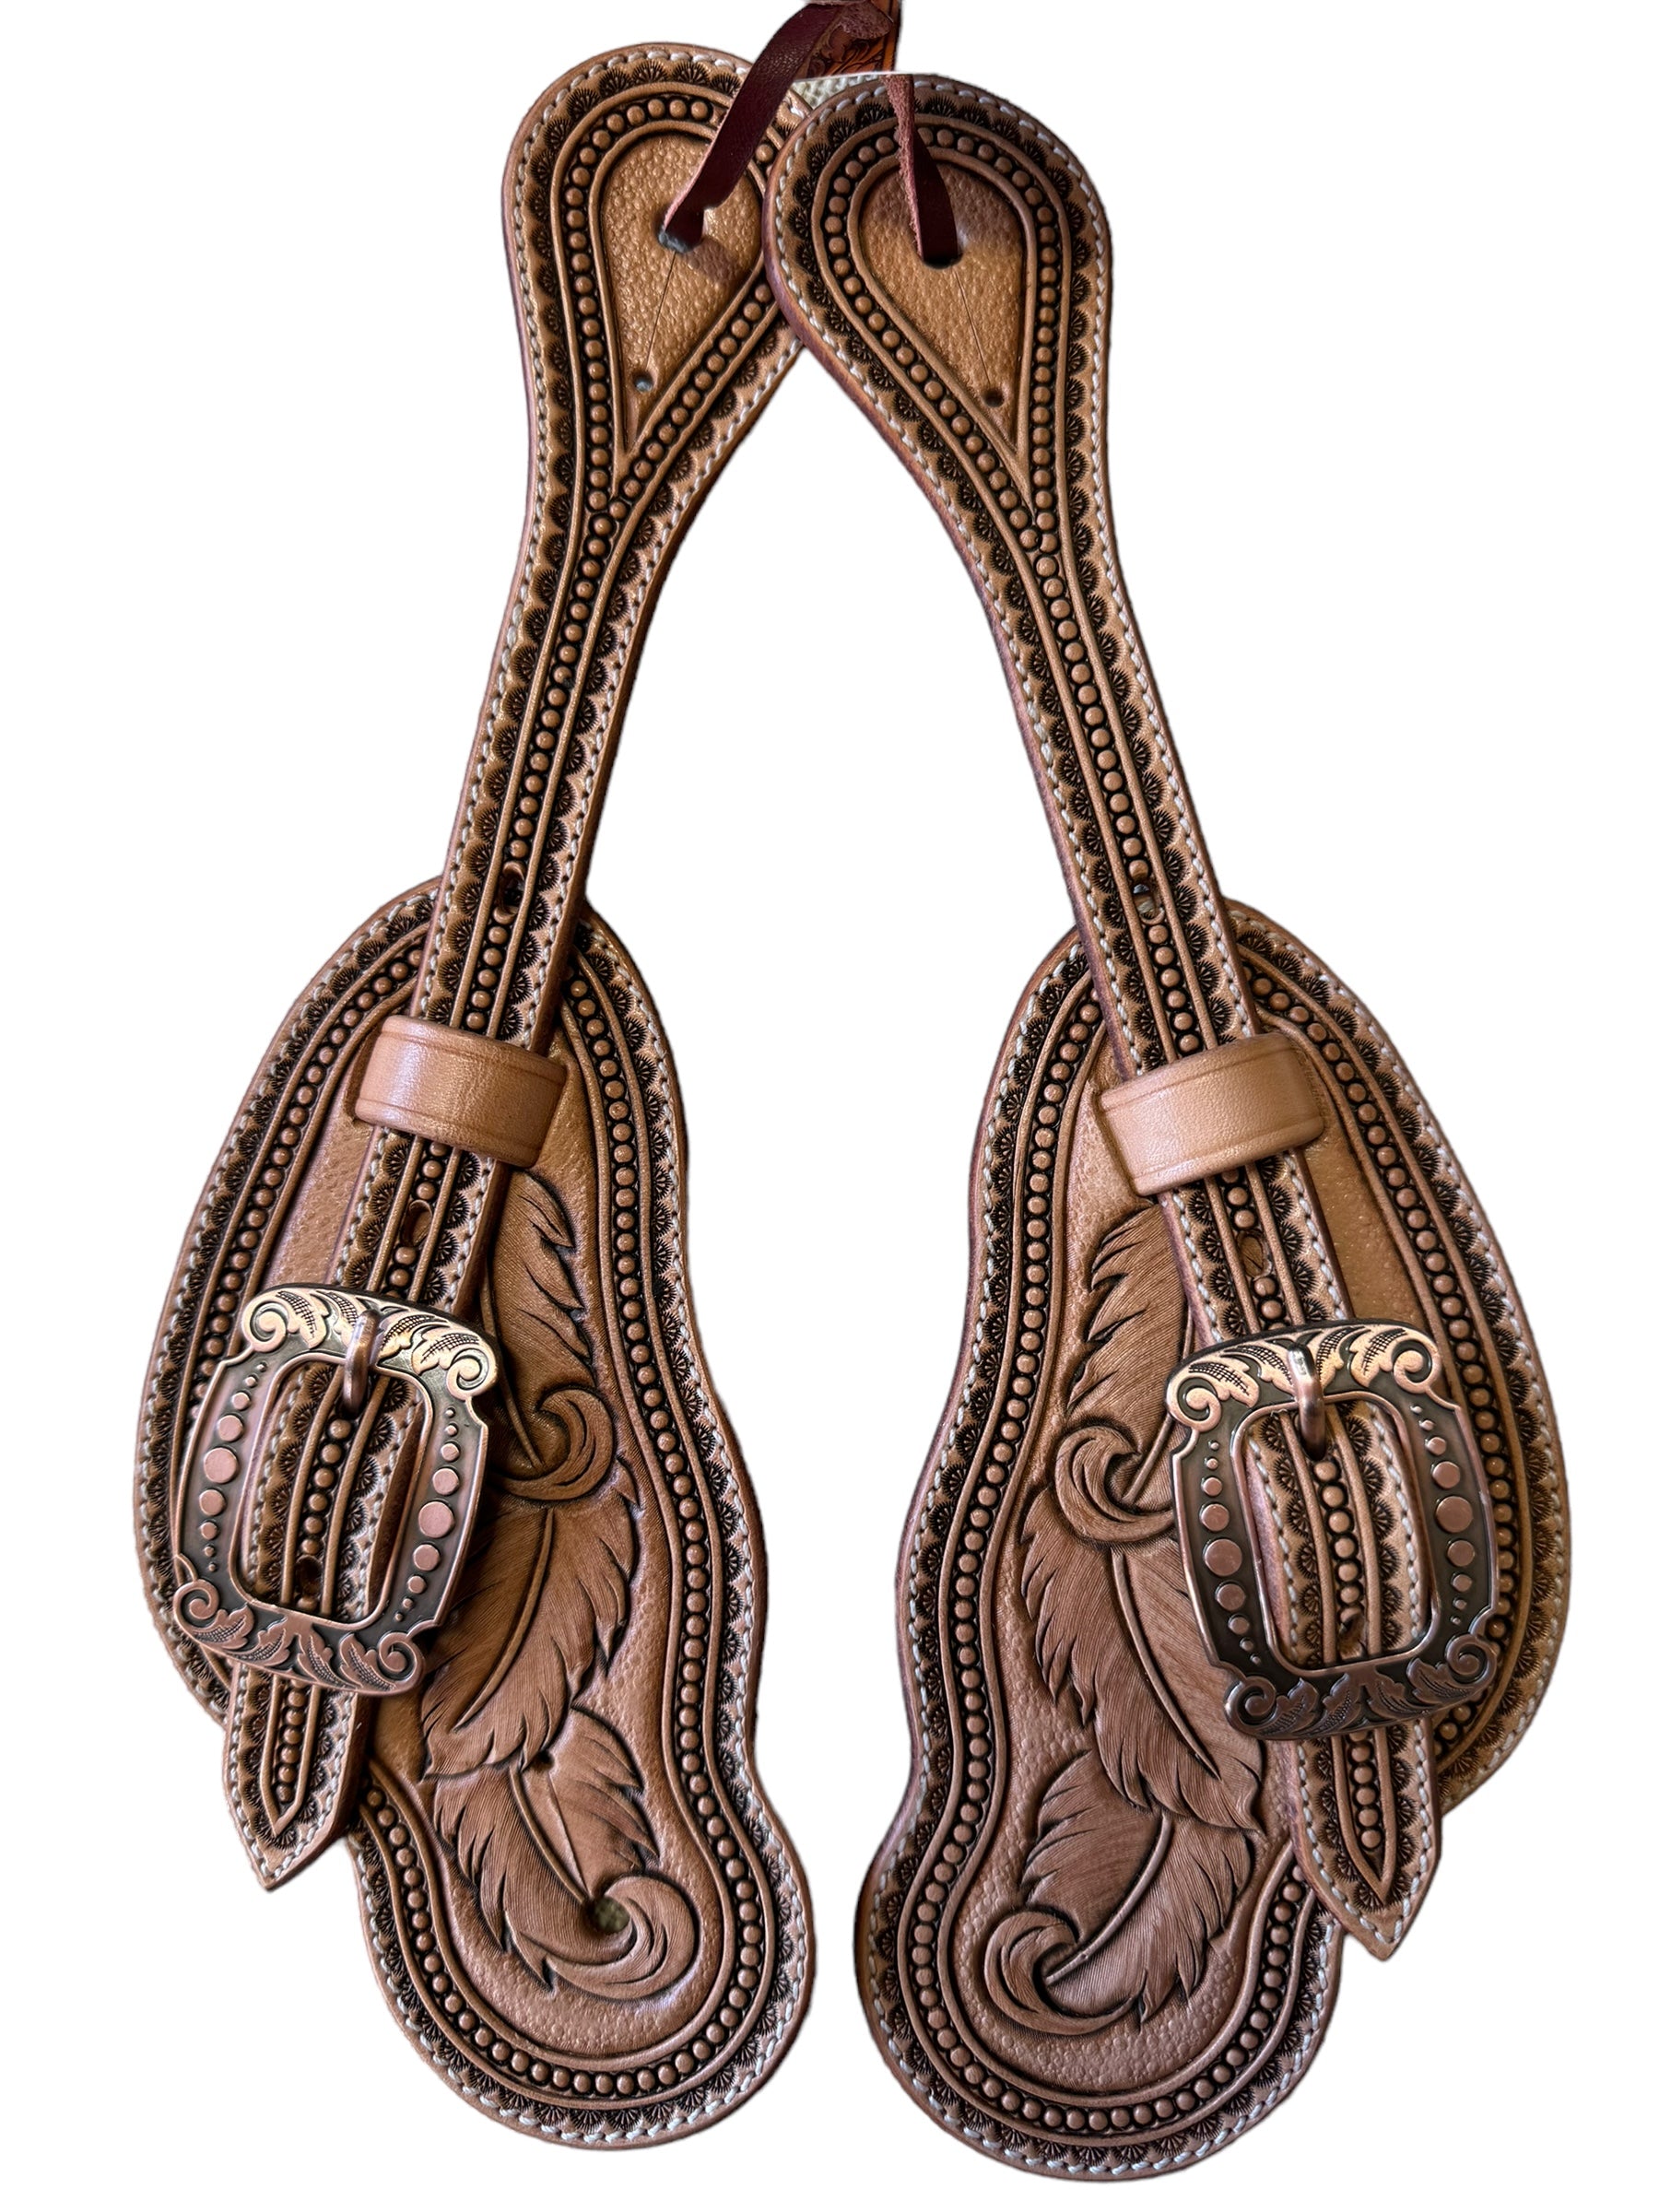 Buckaroo Style Spur Straps with Feathers and spot border